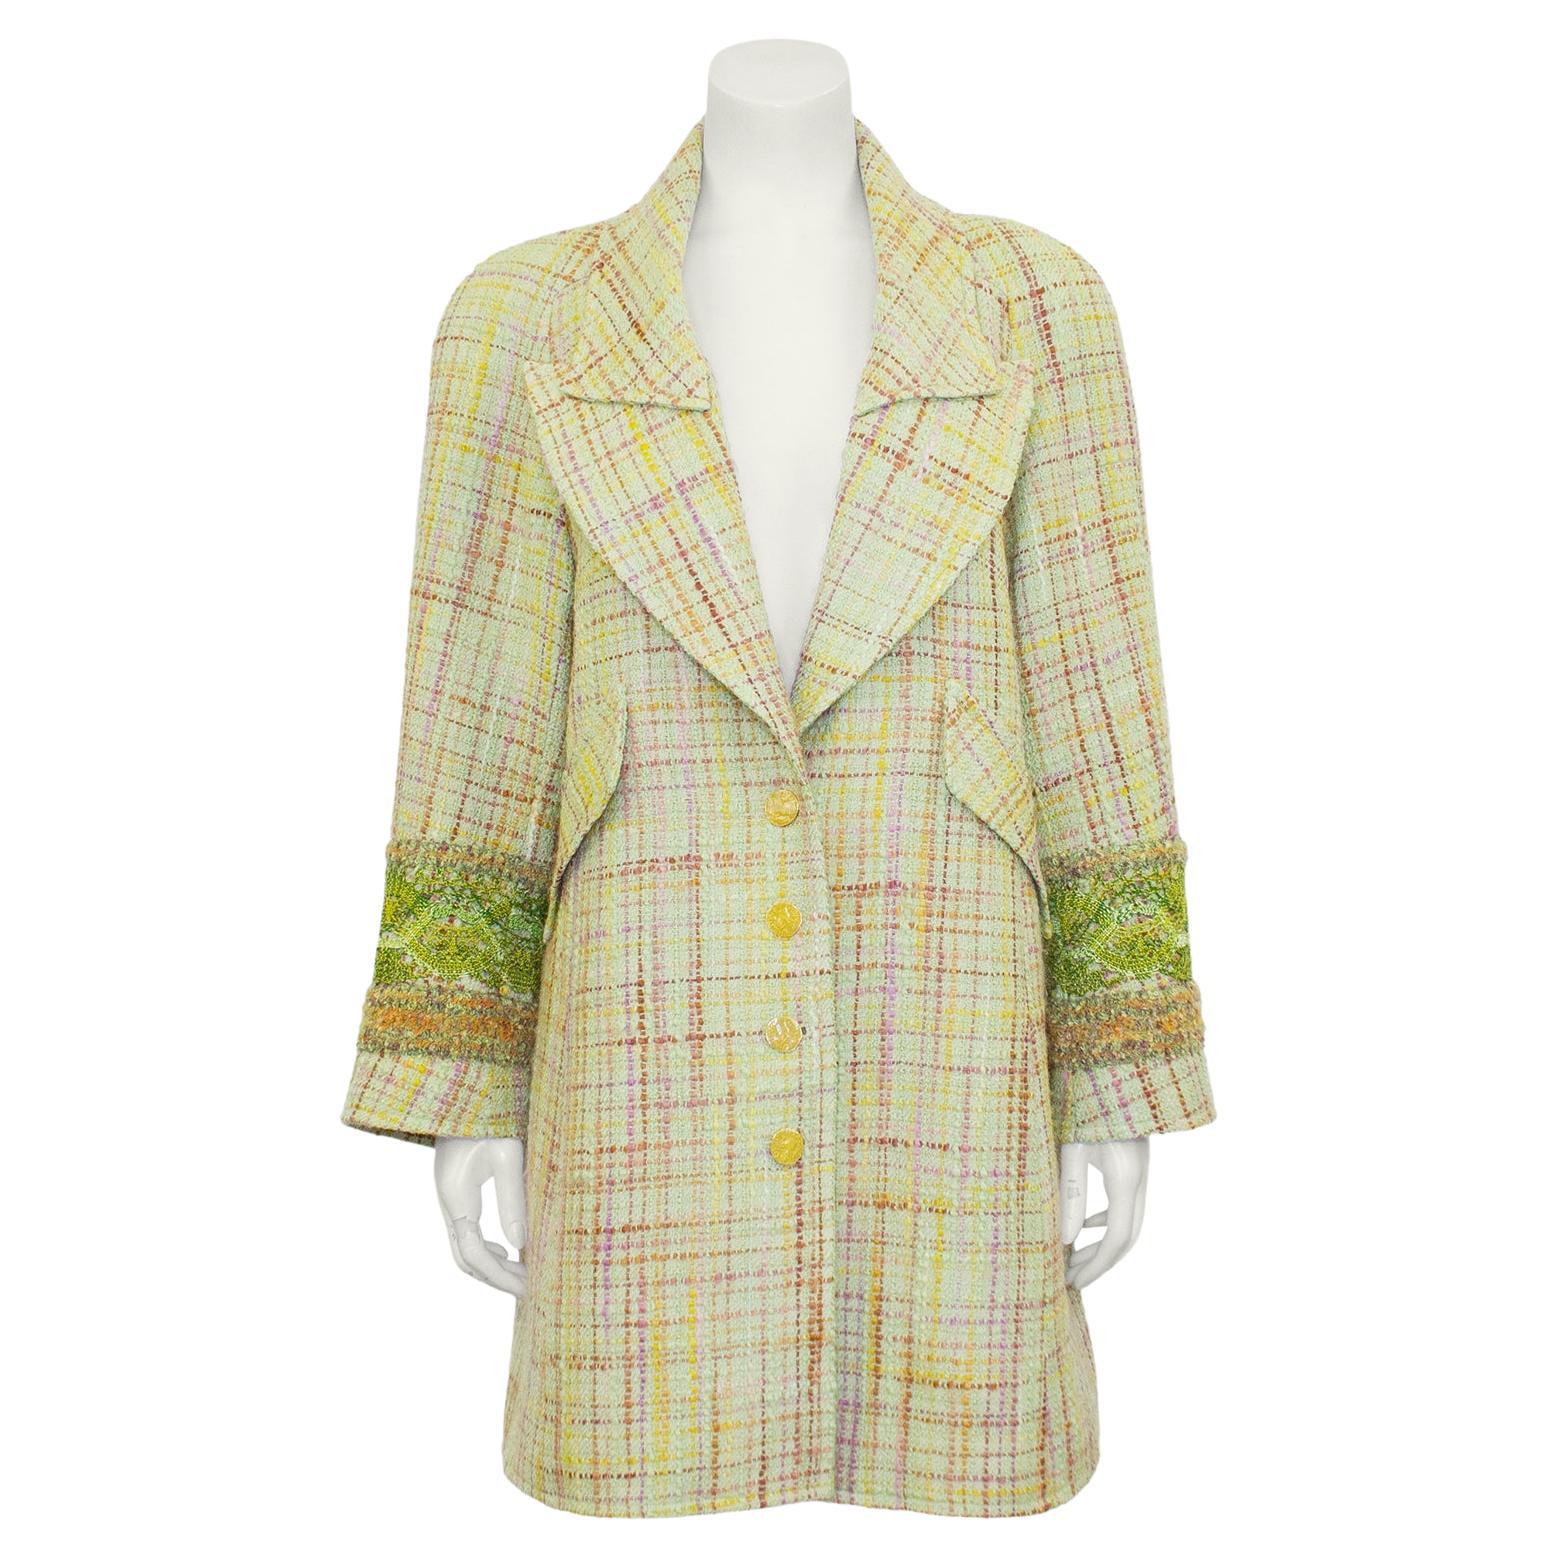 1990s Christian Lacroix Pastel Green Long Tweed Jacket and Skirt Ensemble